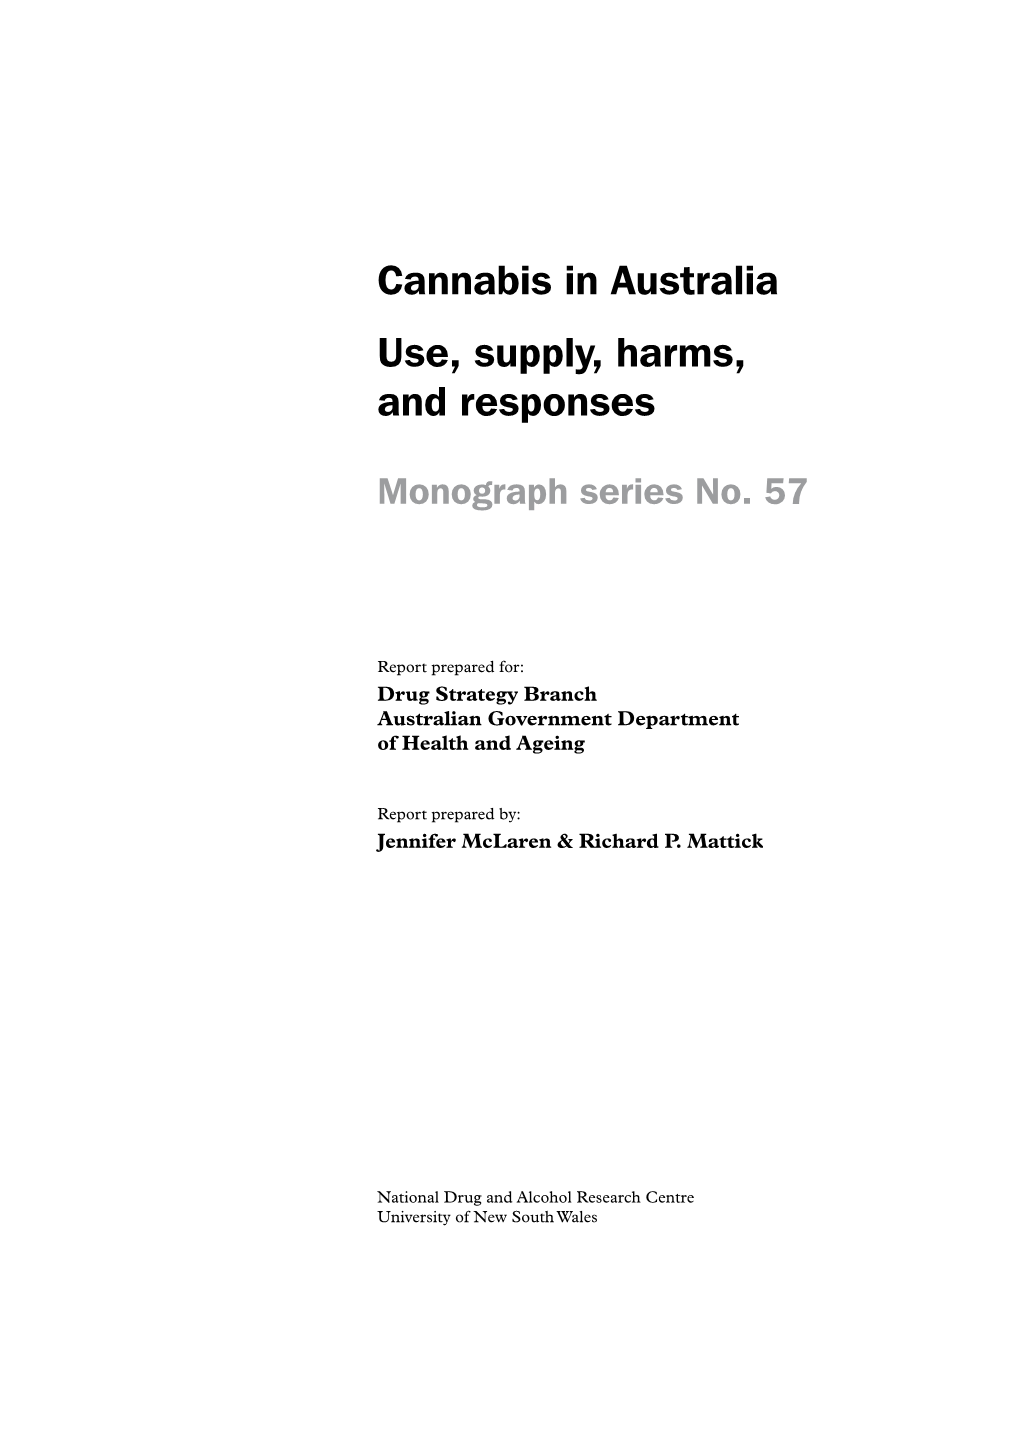 Cannabis in Australia Use, Supply, Harms, and Responses